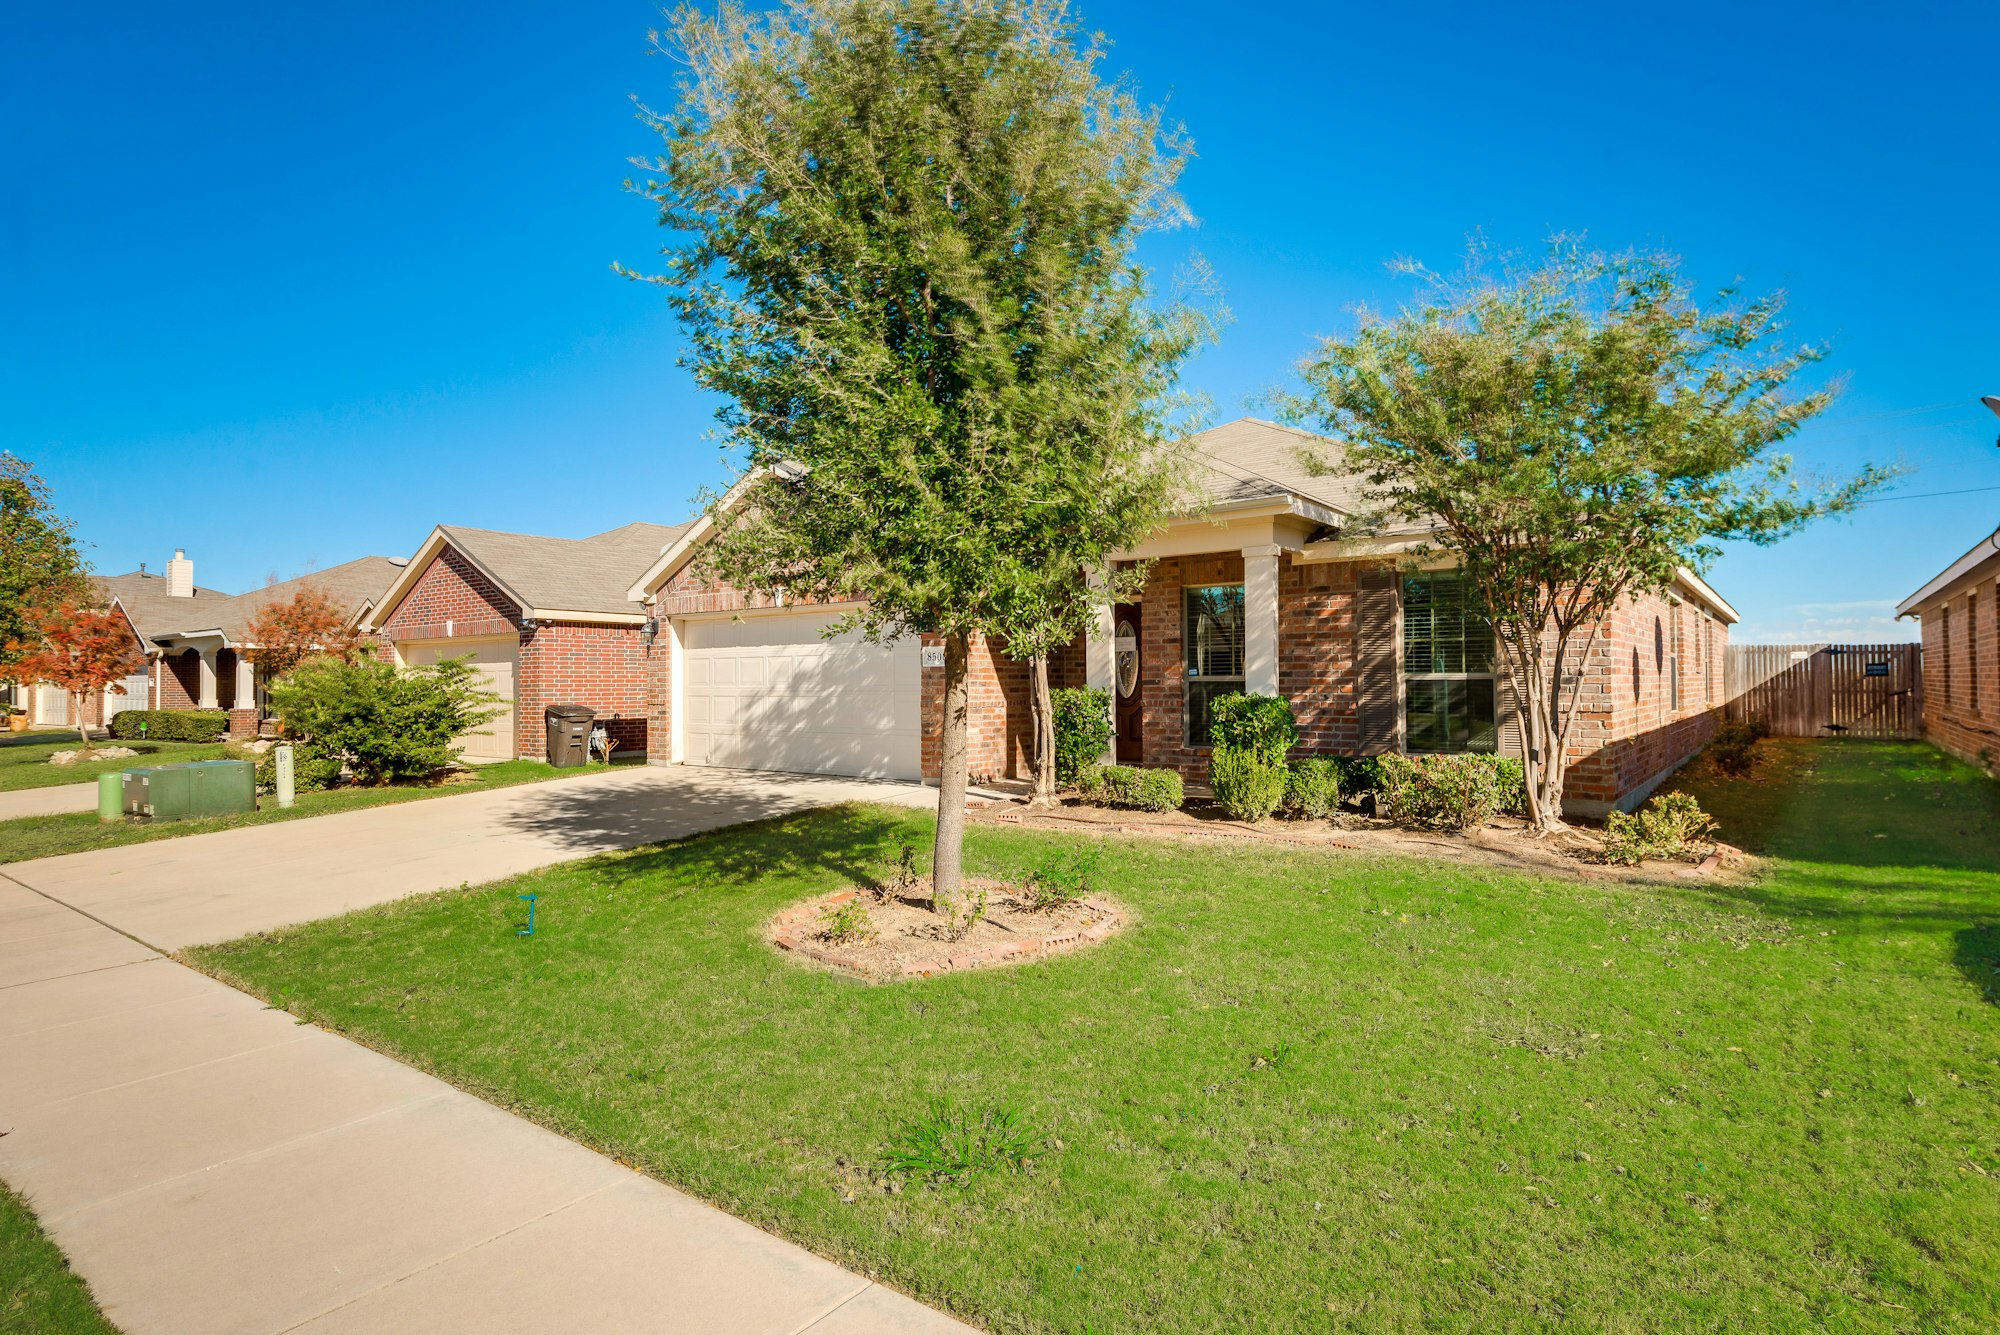 Photo 1 of 27 - 8508 Minturn Dr, Fort Worth, TX 76131